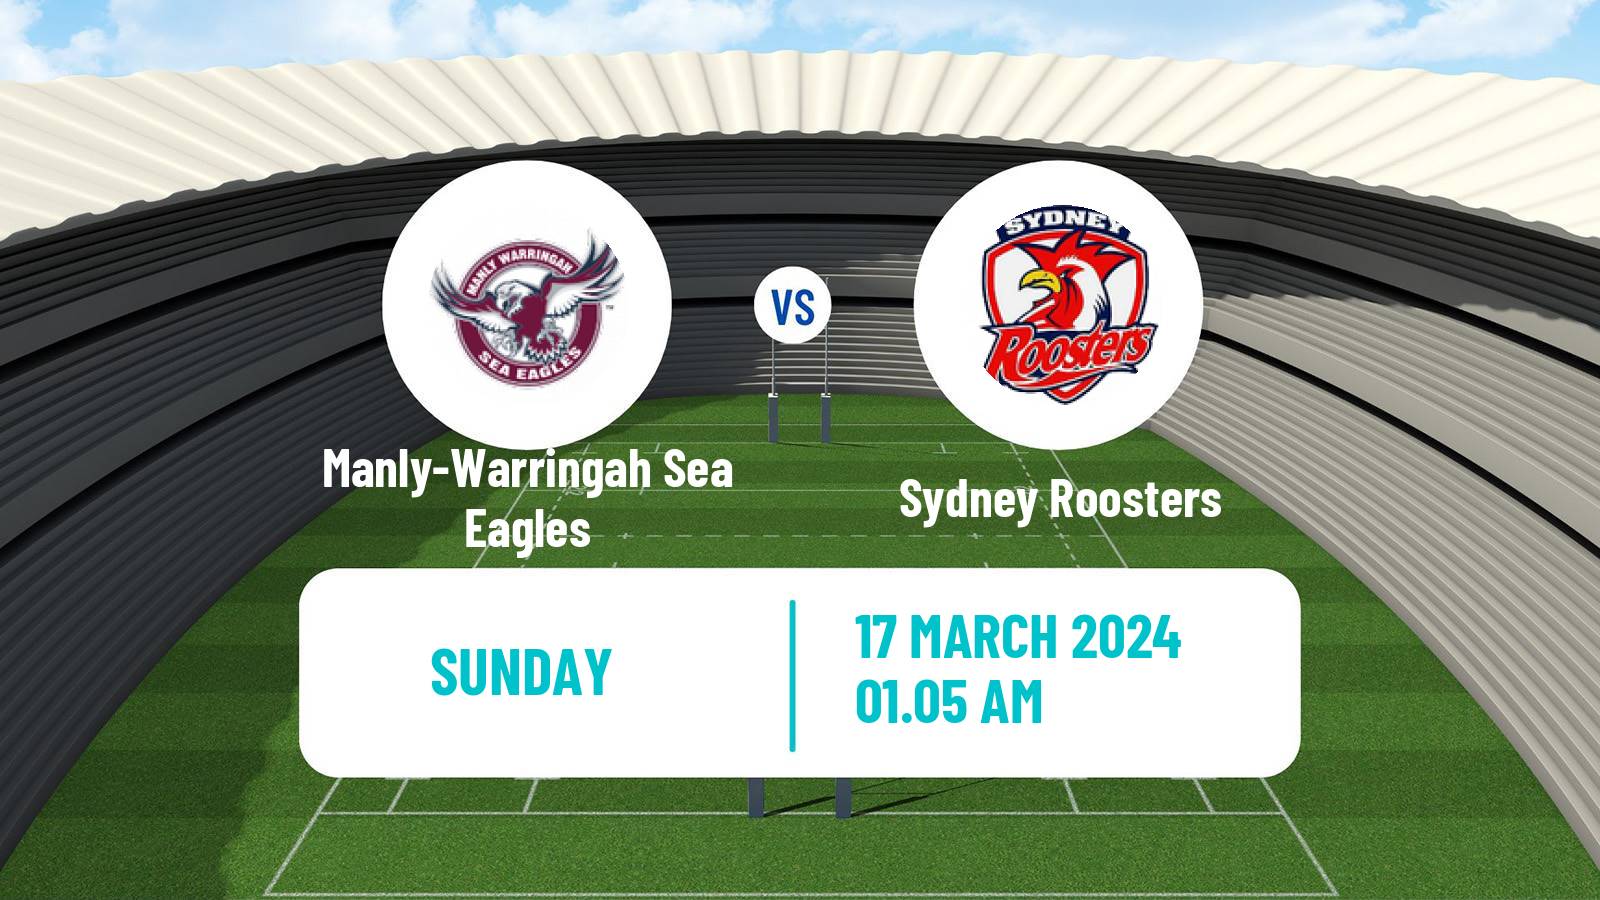 Rugby league Australian NRL Manly-Warringah Sea Eagles - Sydney Roosters